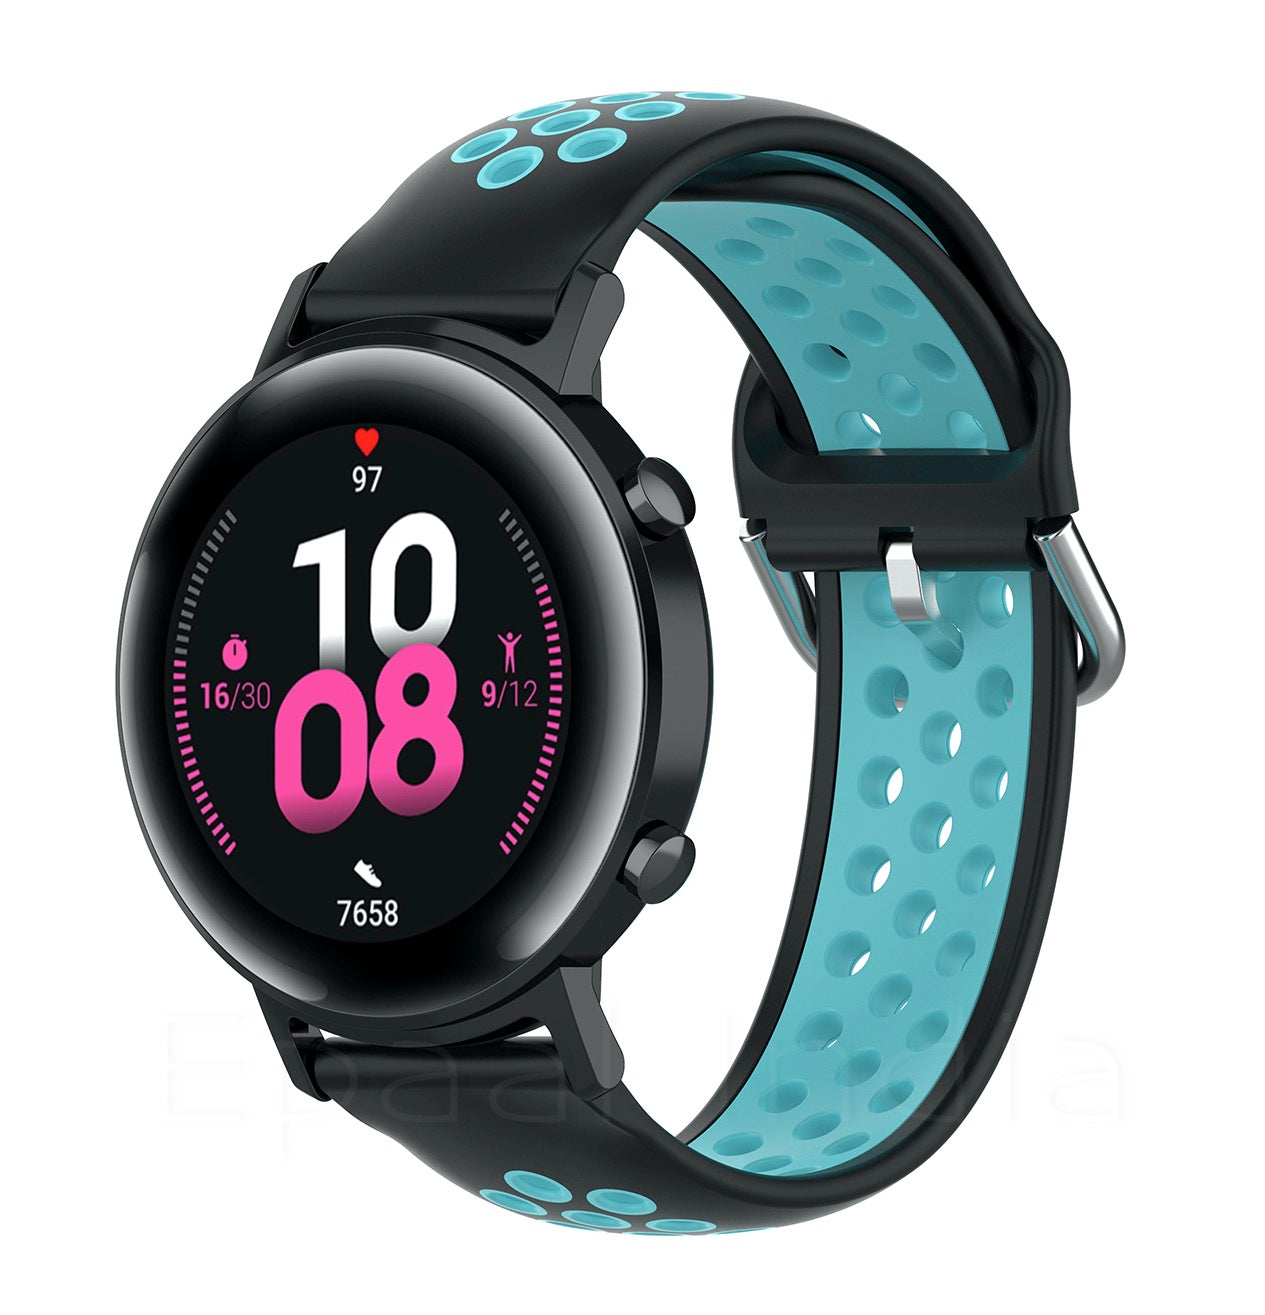 Epaal 20mm Sports Dual Color Straps for Realme Watch, Amazfit Bip, Amazfit GTS, Galaxy Watch Active 2, Gear S2 Classic, Samsung Gear smartwatch